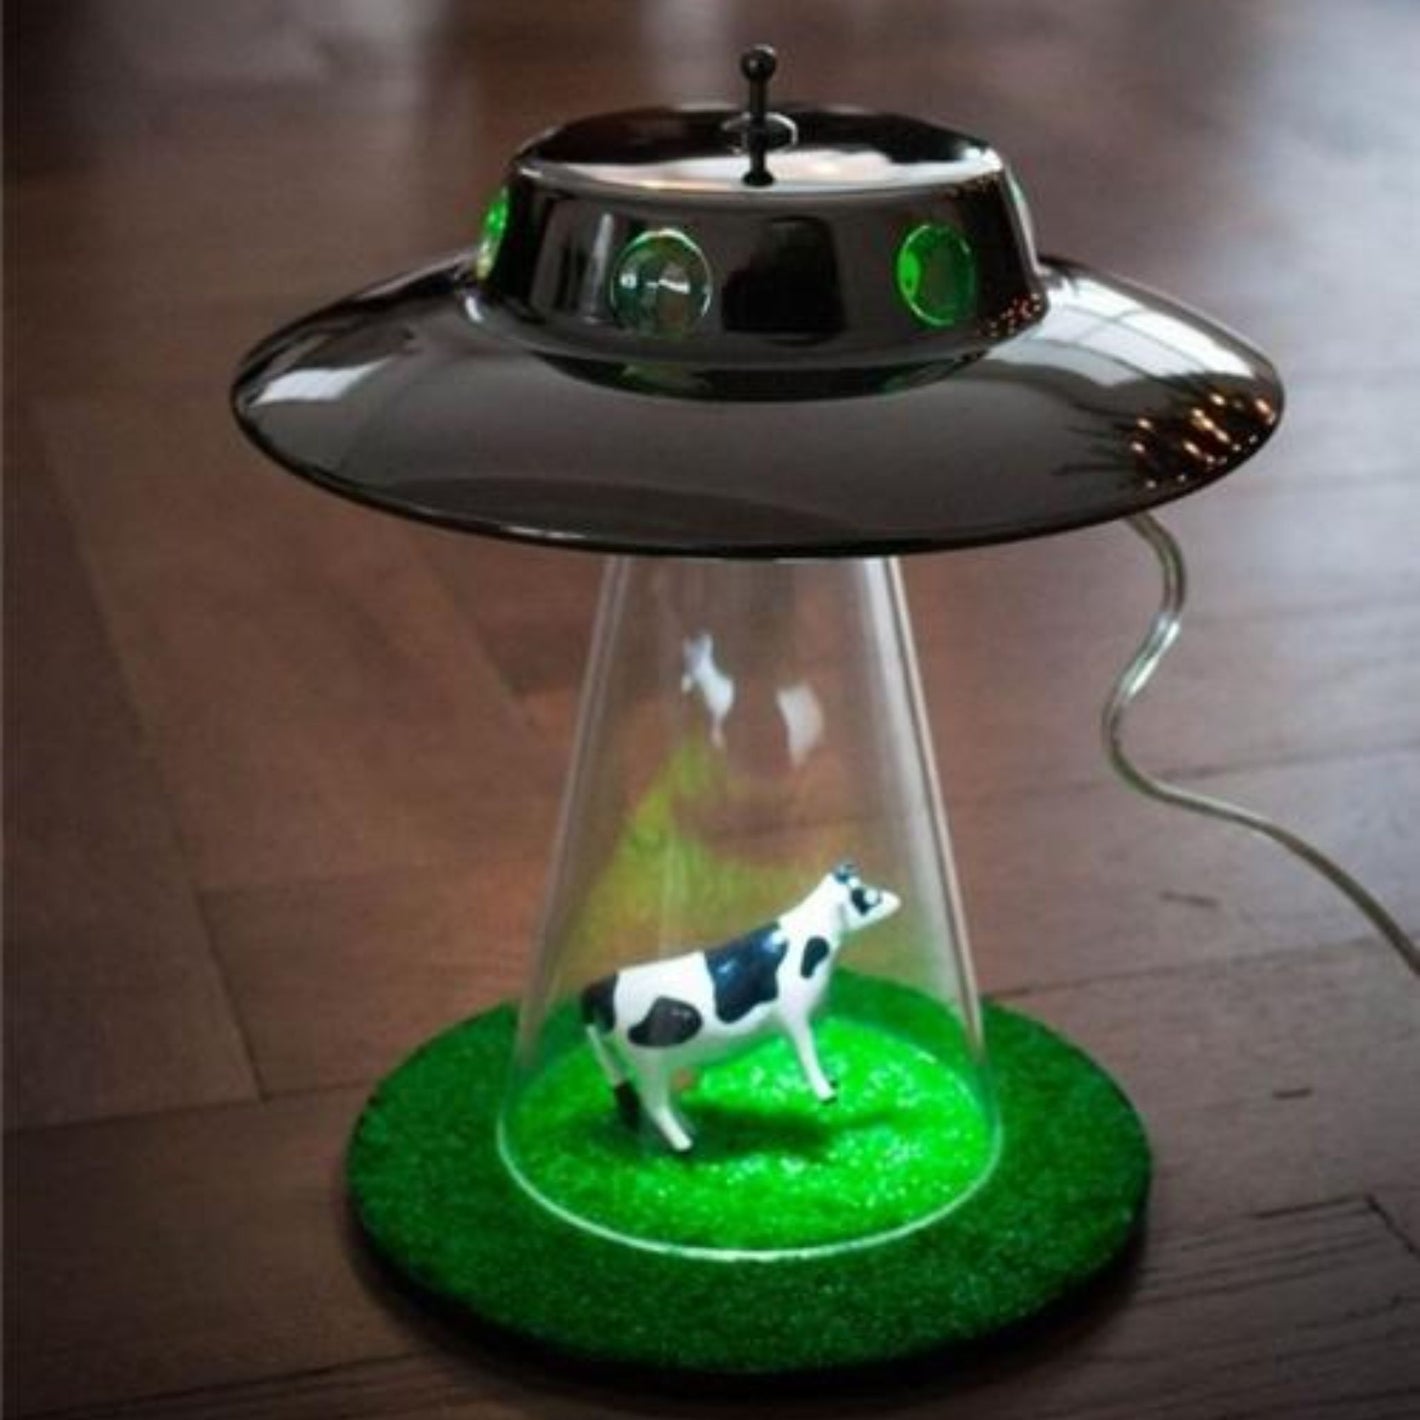 reviews 2 - Original UFO Cow Lamp & amazon alien abduction table desk lamp with grass, cow and flying UFO saucer LED RGB night light